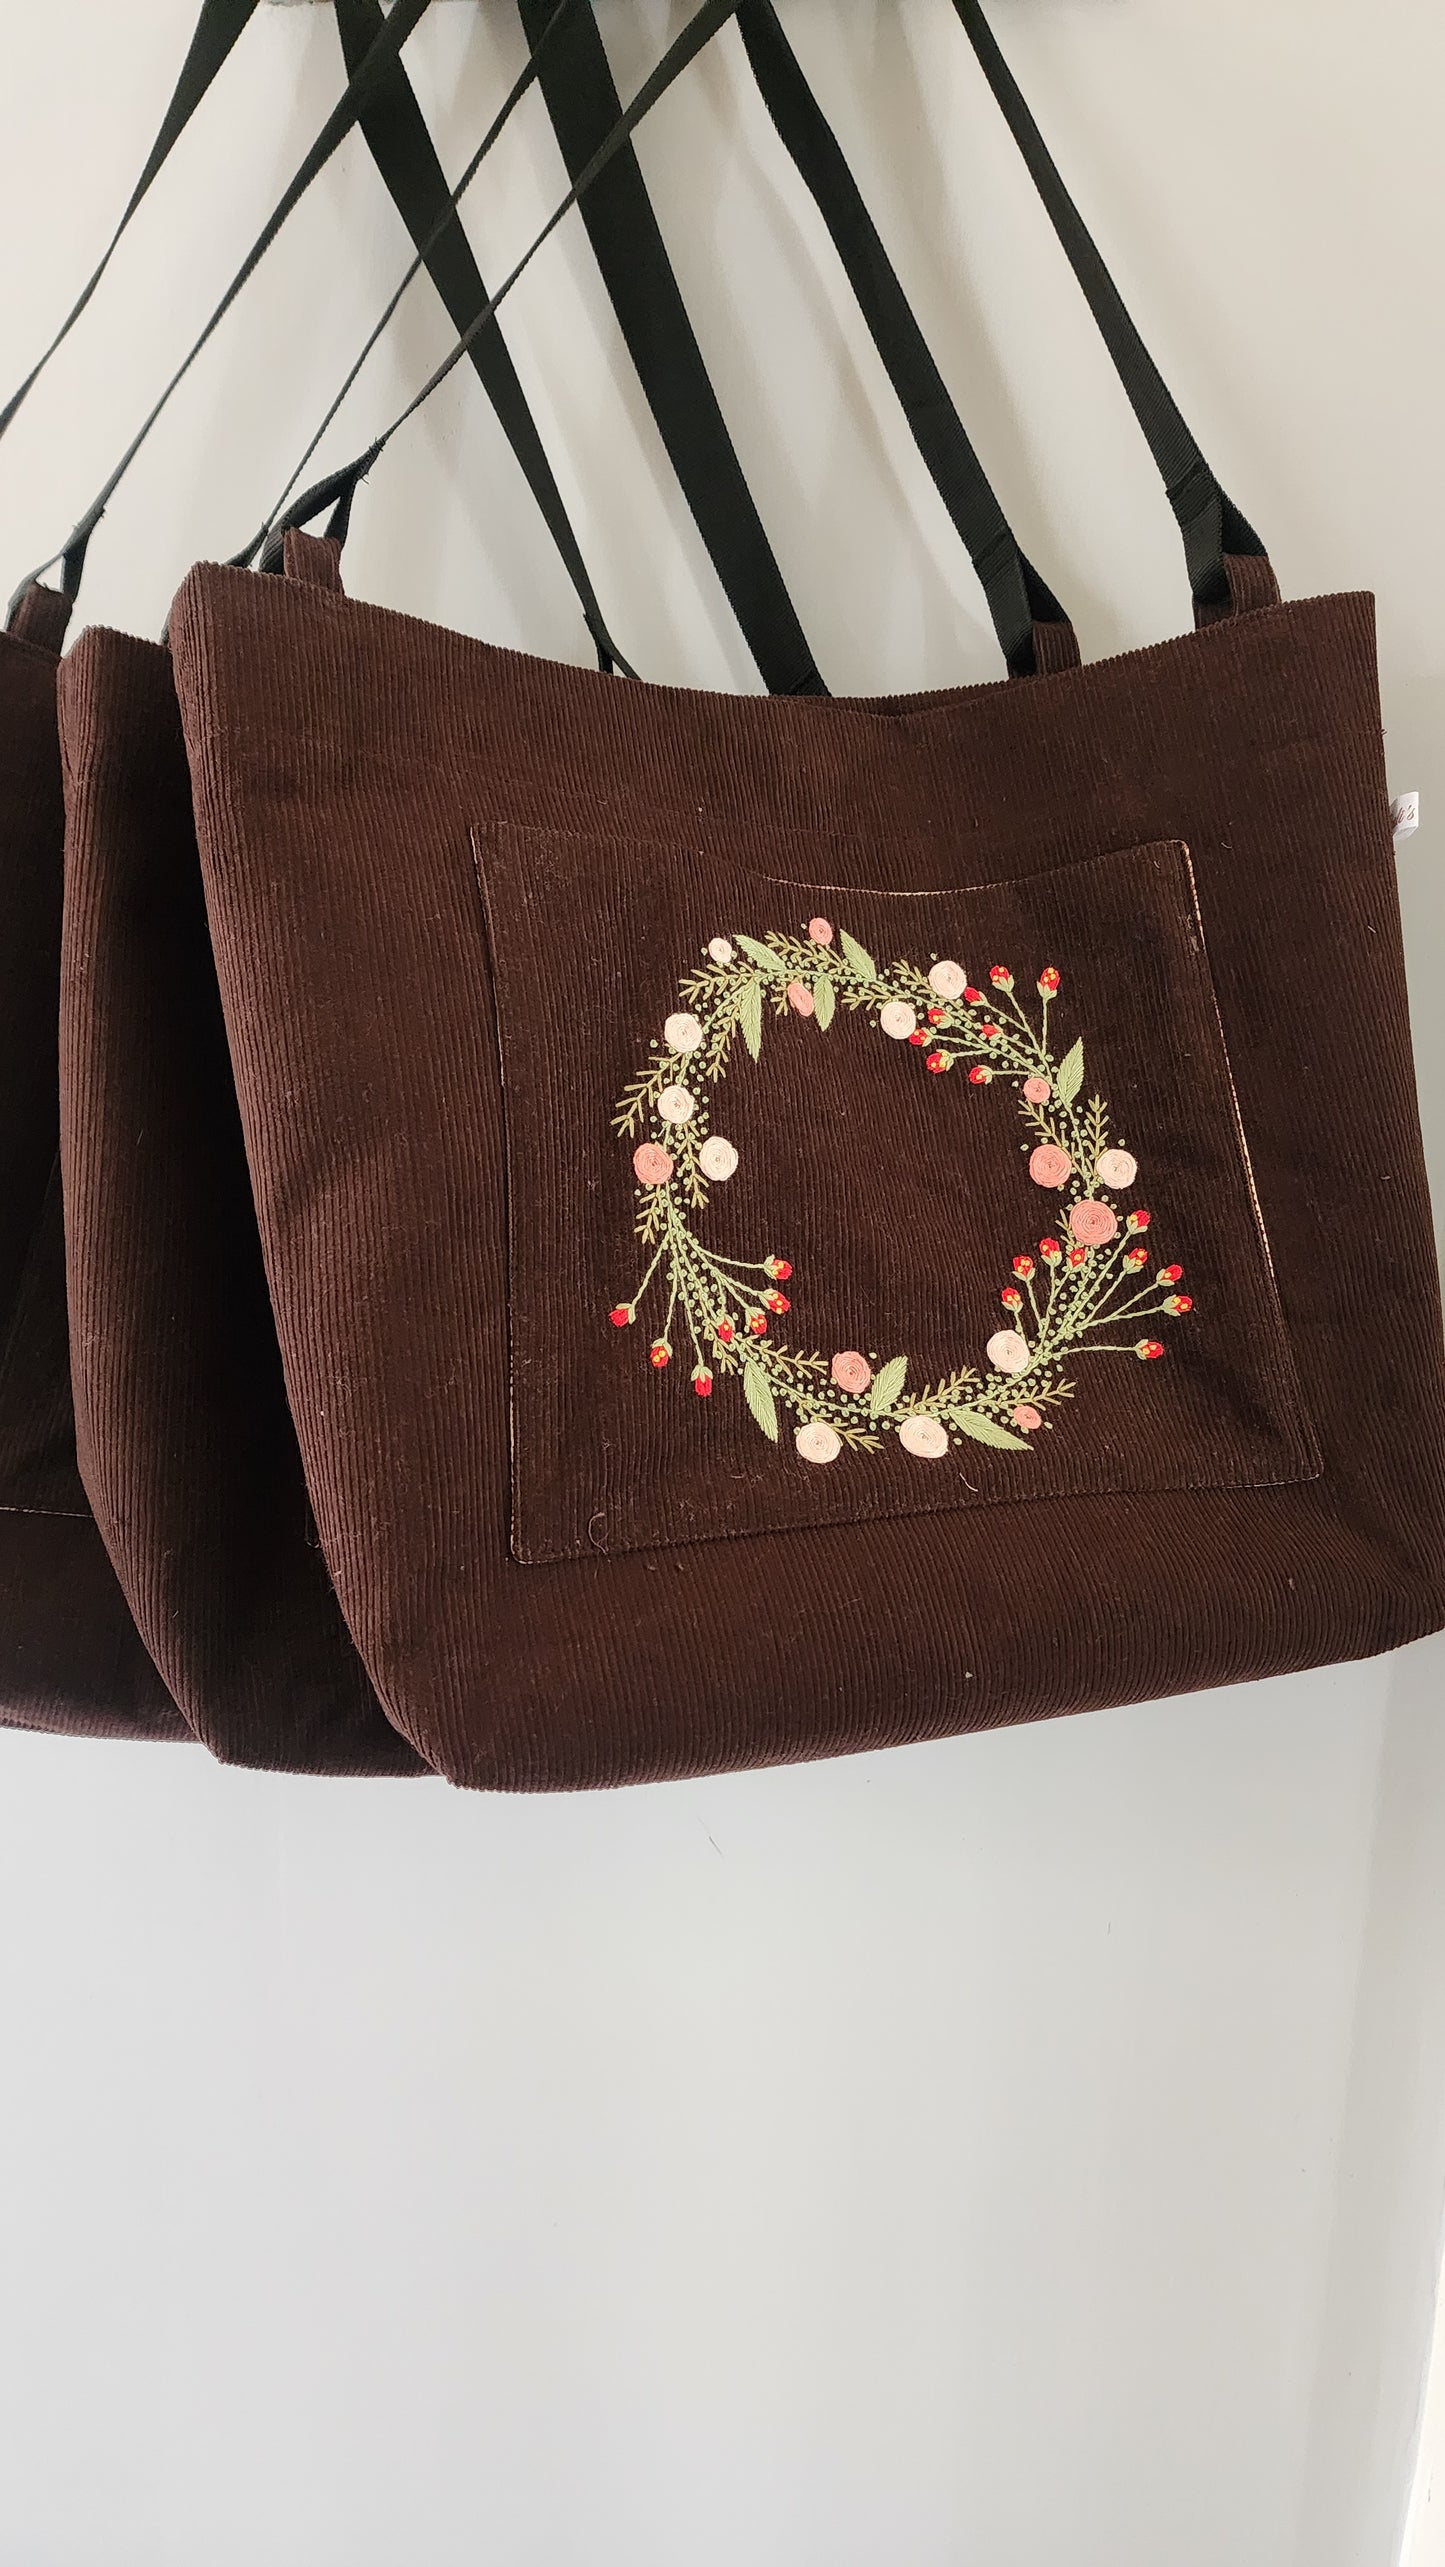 Ikali - Peach Floral Wreath - Hand-embroidered Tote